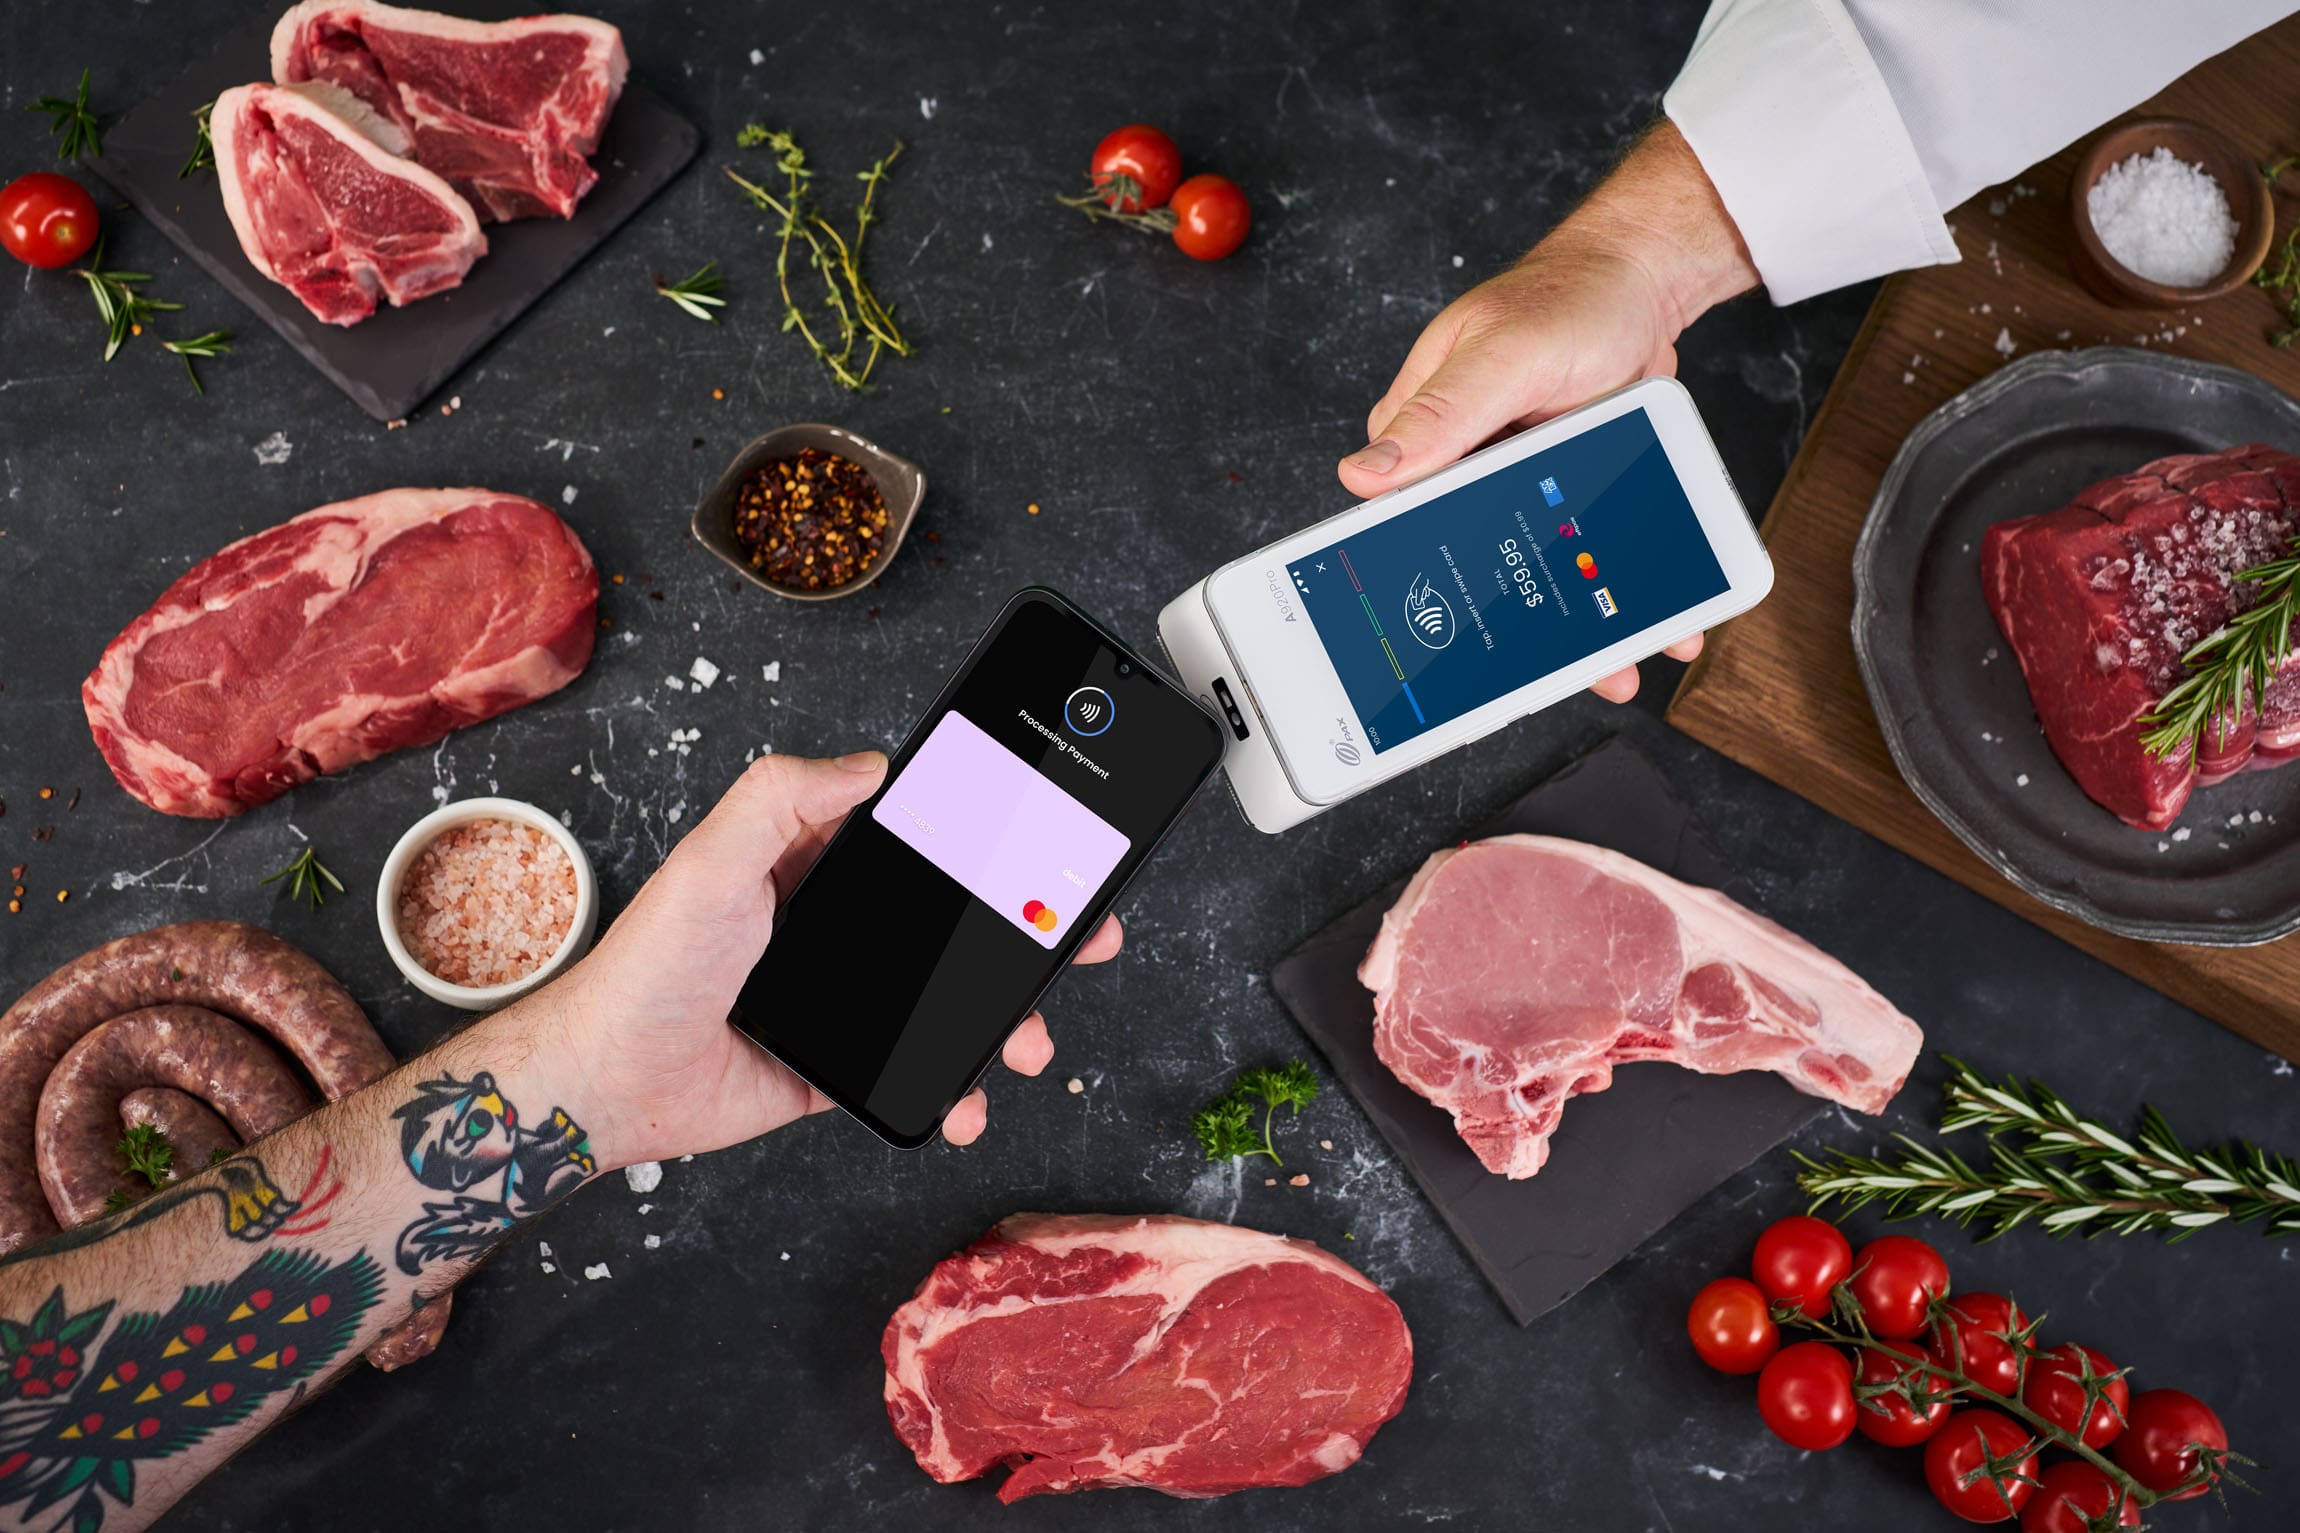 Phone tapping Android terminal to make payment, surrounded by assorted butcher meats